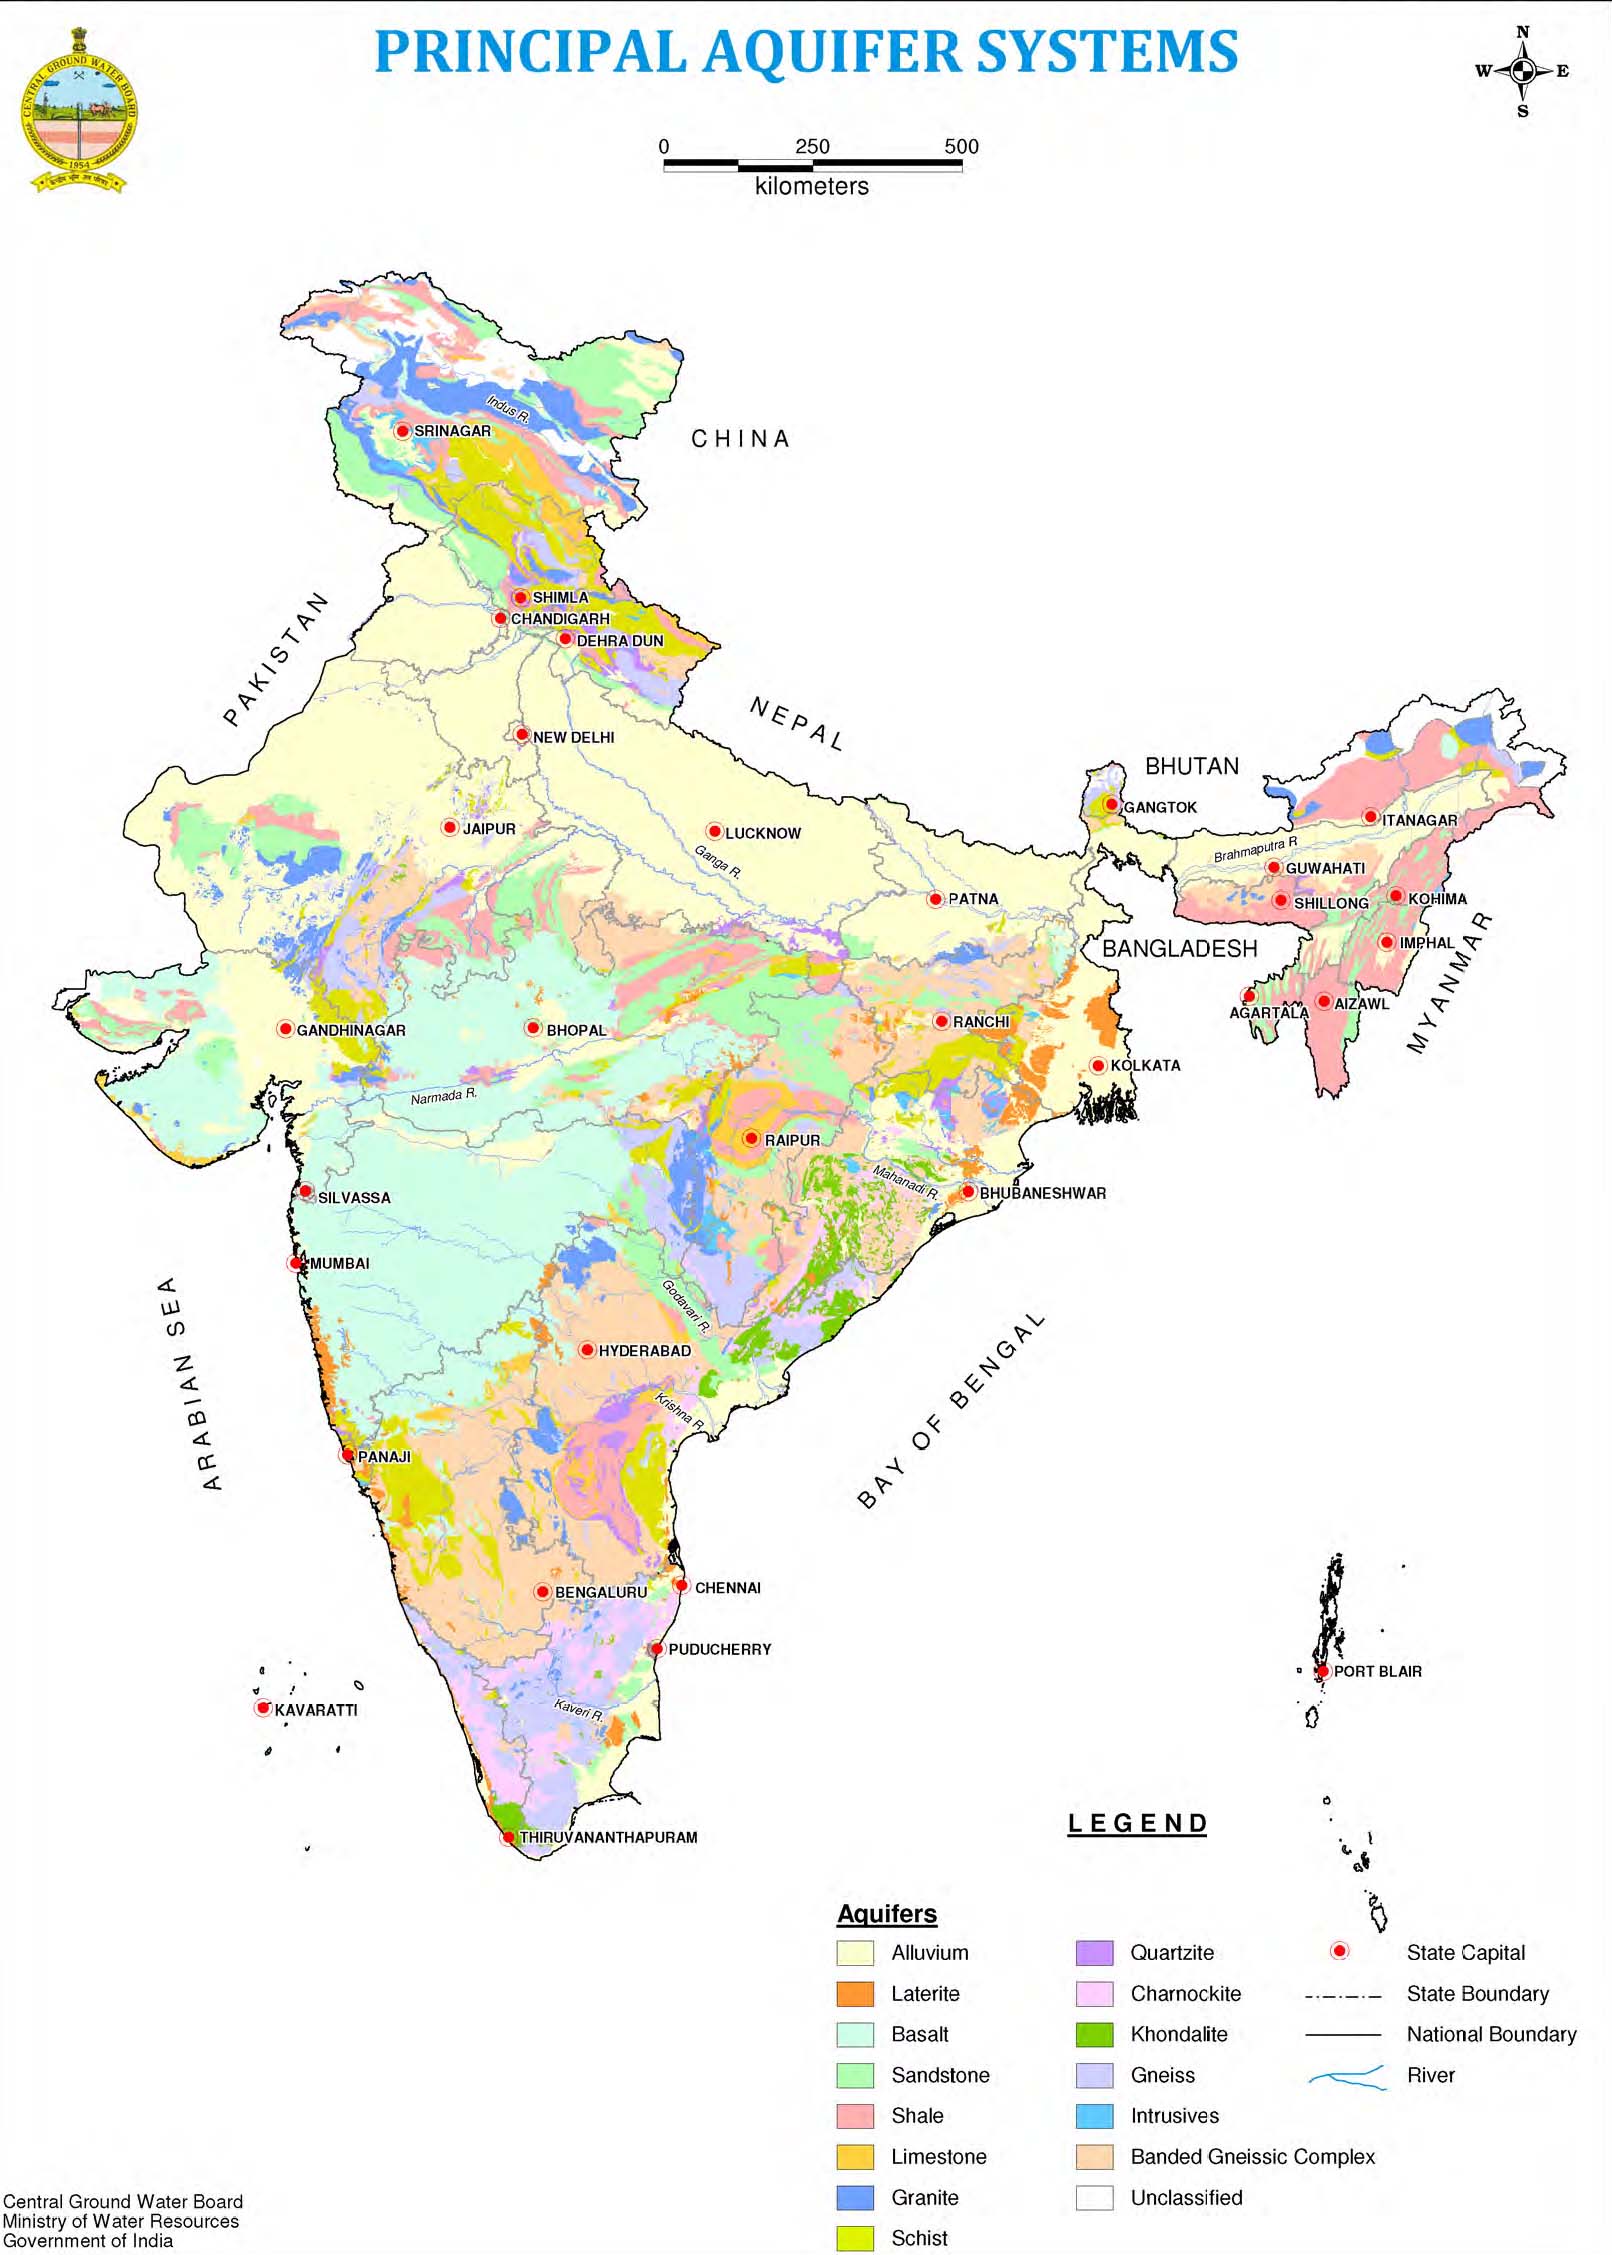 aquifer systems of India